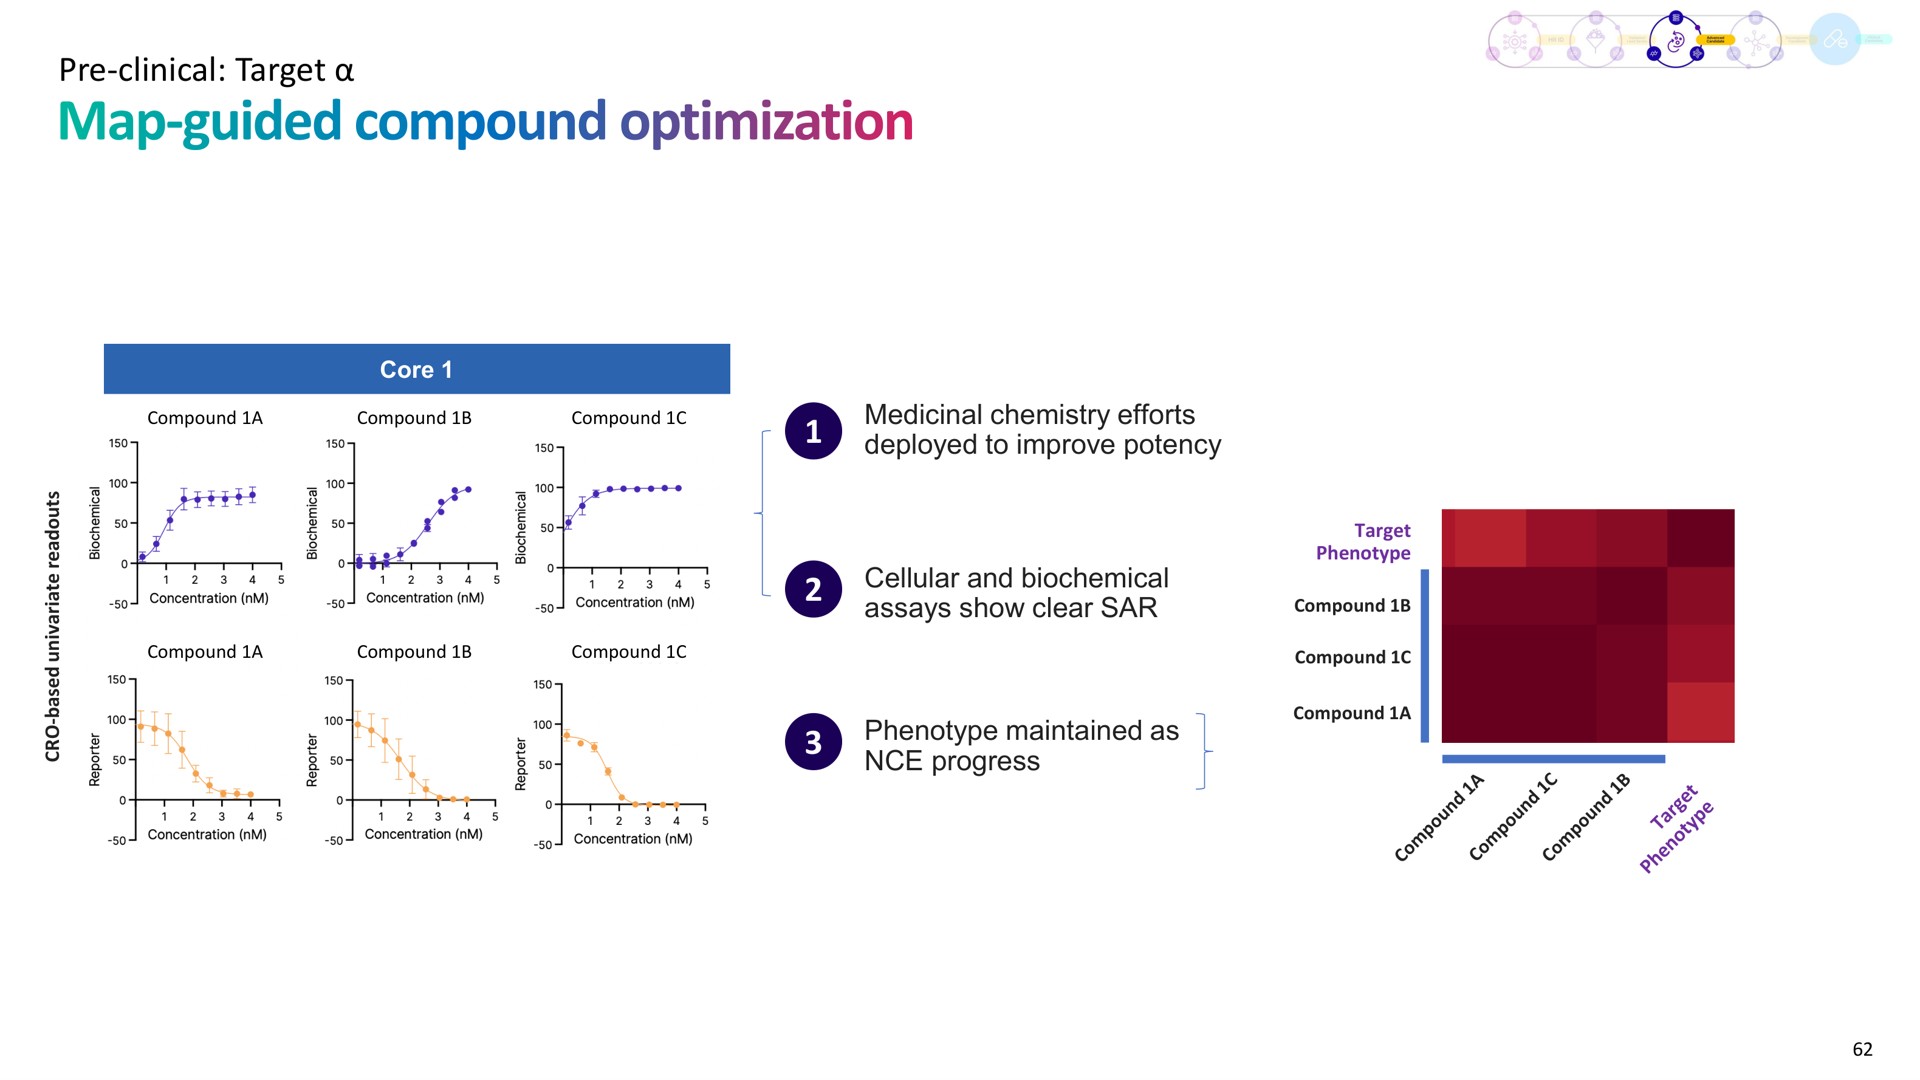 clinical target map guided compound optimization | Recursion Pharmaceuticals